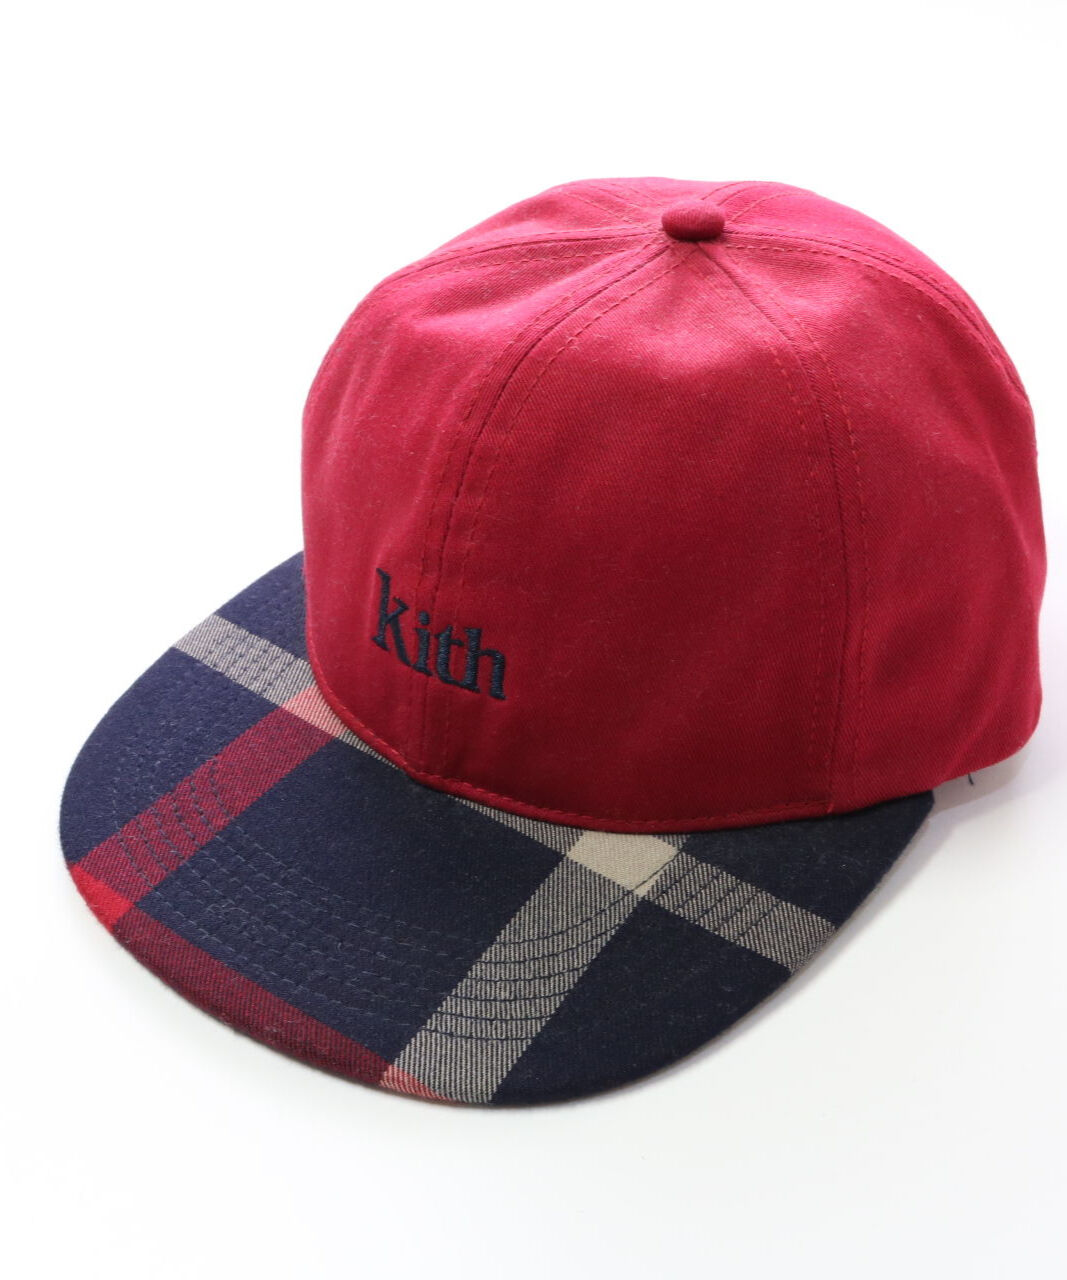 KITH キャップ ronnie fieg  ピンク